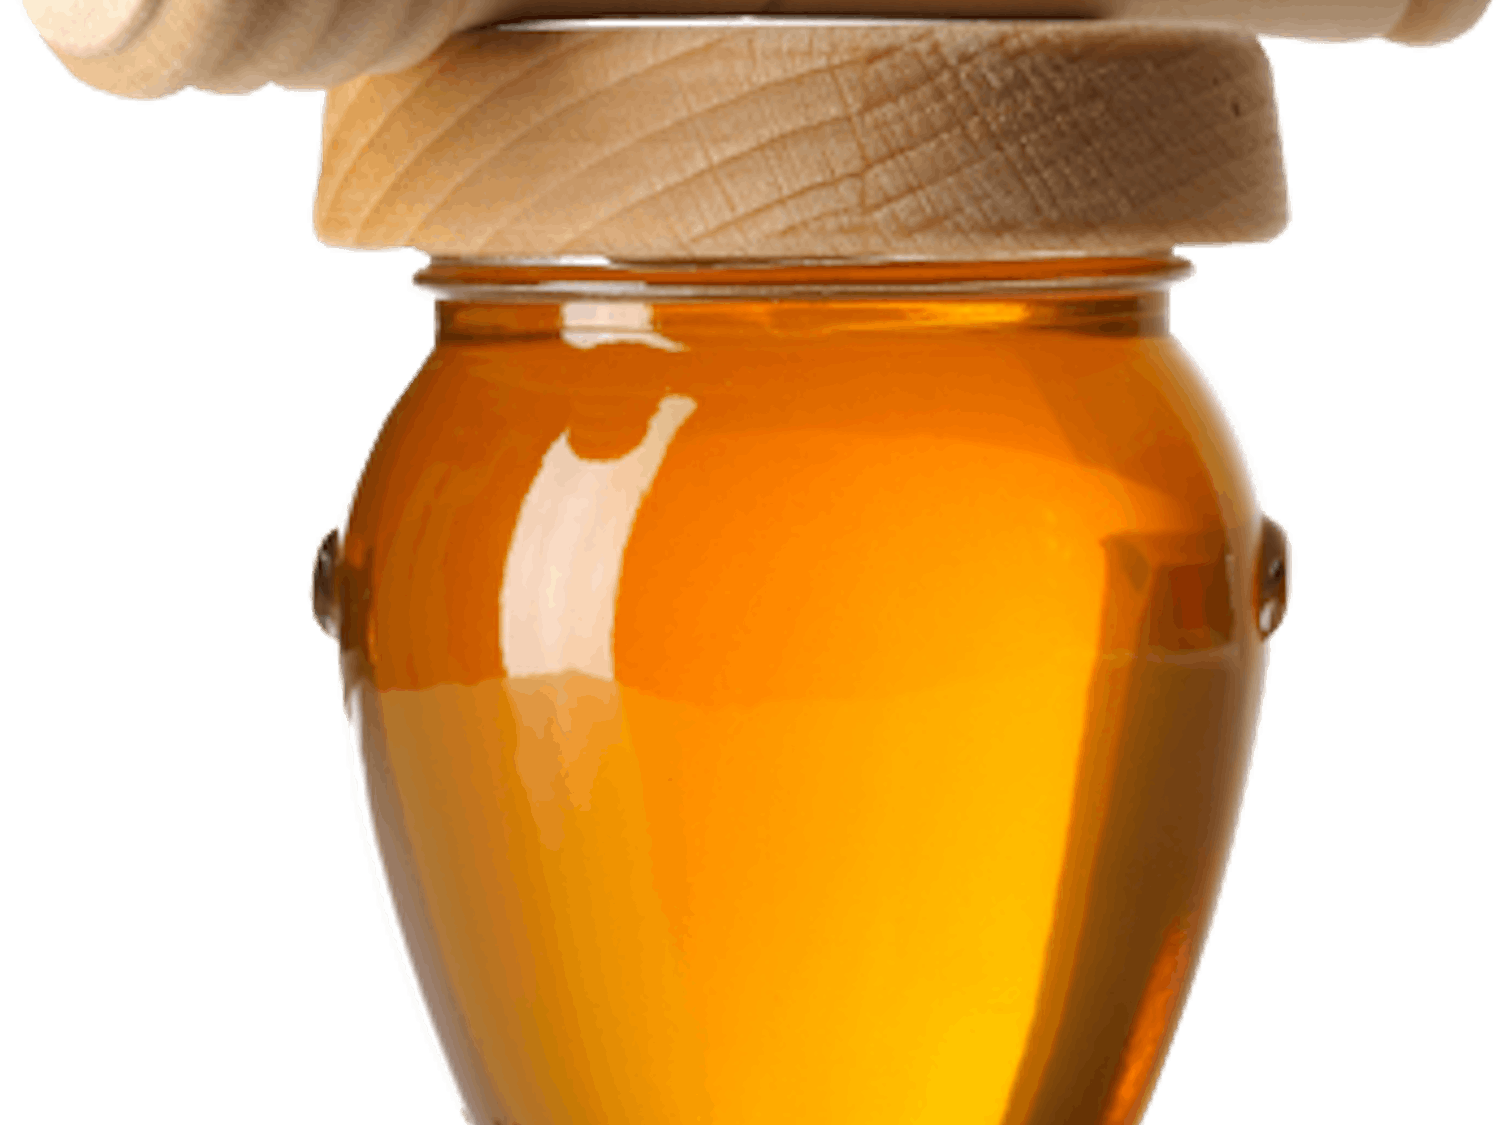 Your sweet tooth (or teeth!) will be pleased to know that honey is actually sweeter than its processed sugar and chemical-infused artificial sweetener counterparts